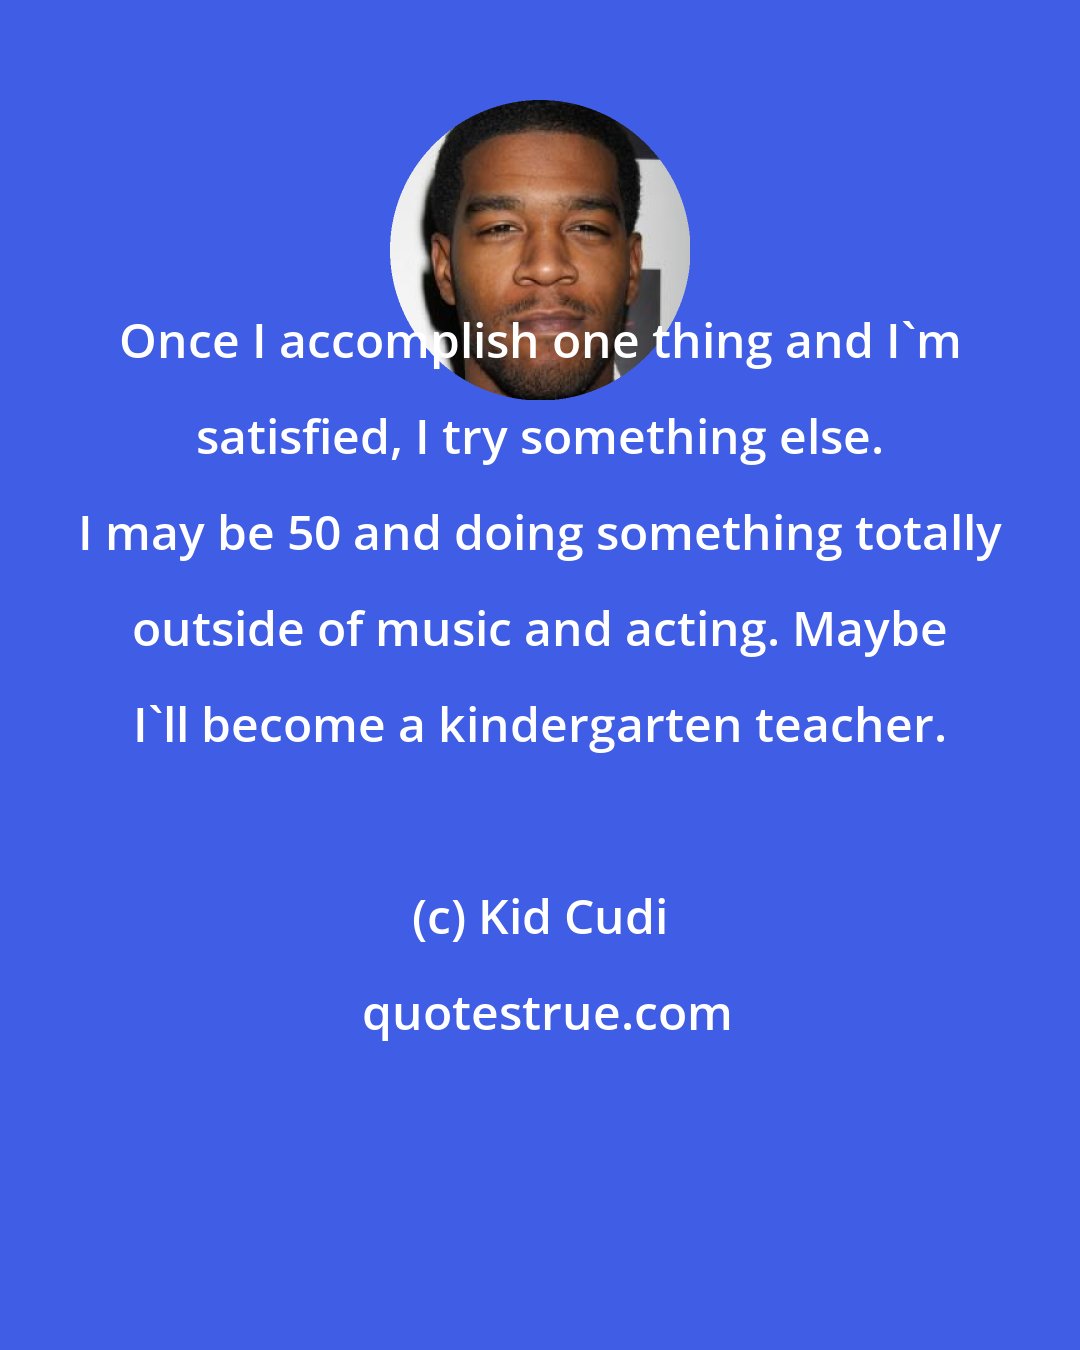 Kid Cudi: Once I accomplish one thing and I'm satisfied, I try something else. I may be 50 and doing something totally outside of music and acting. Maybe I'll become a kindergarten teacher.